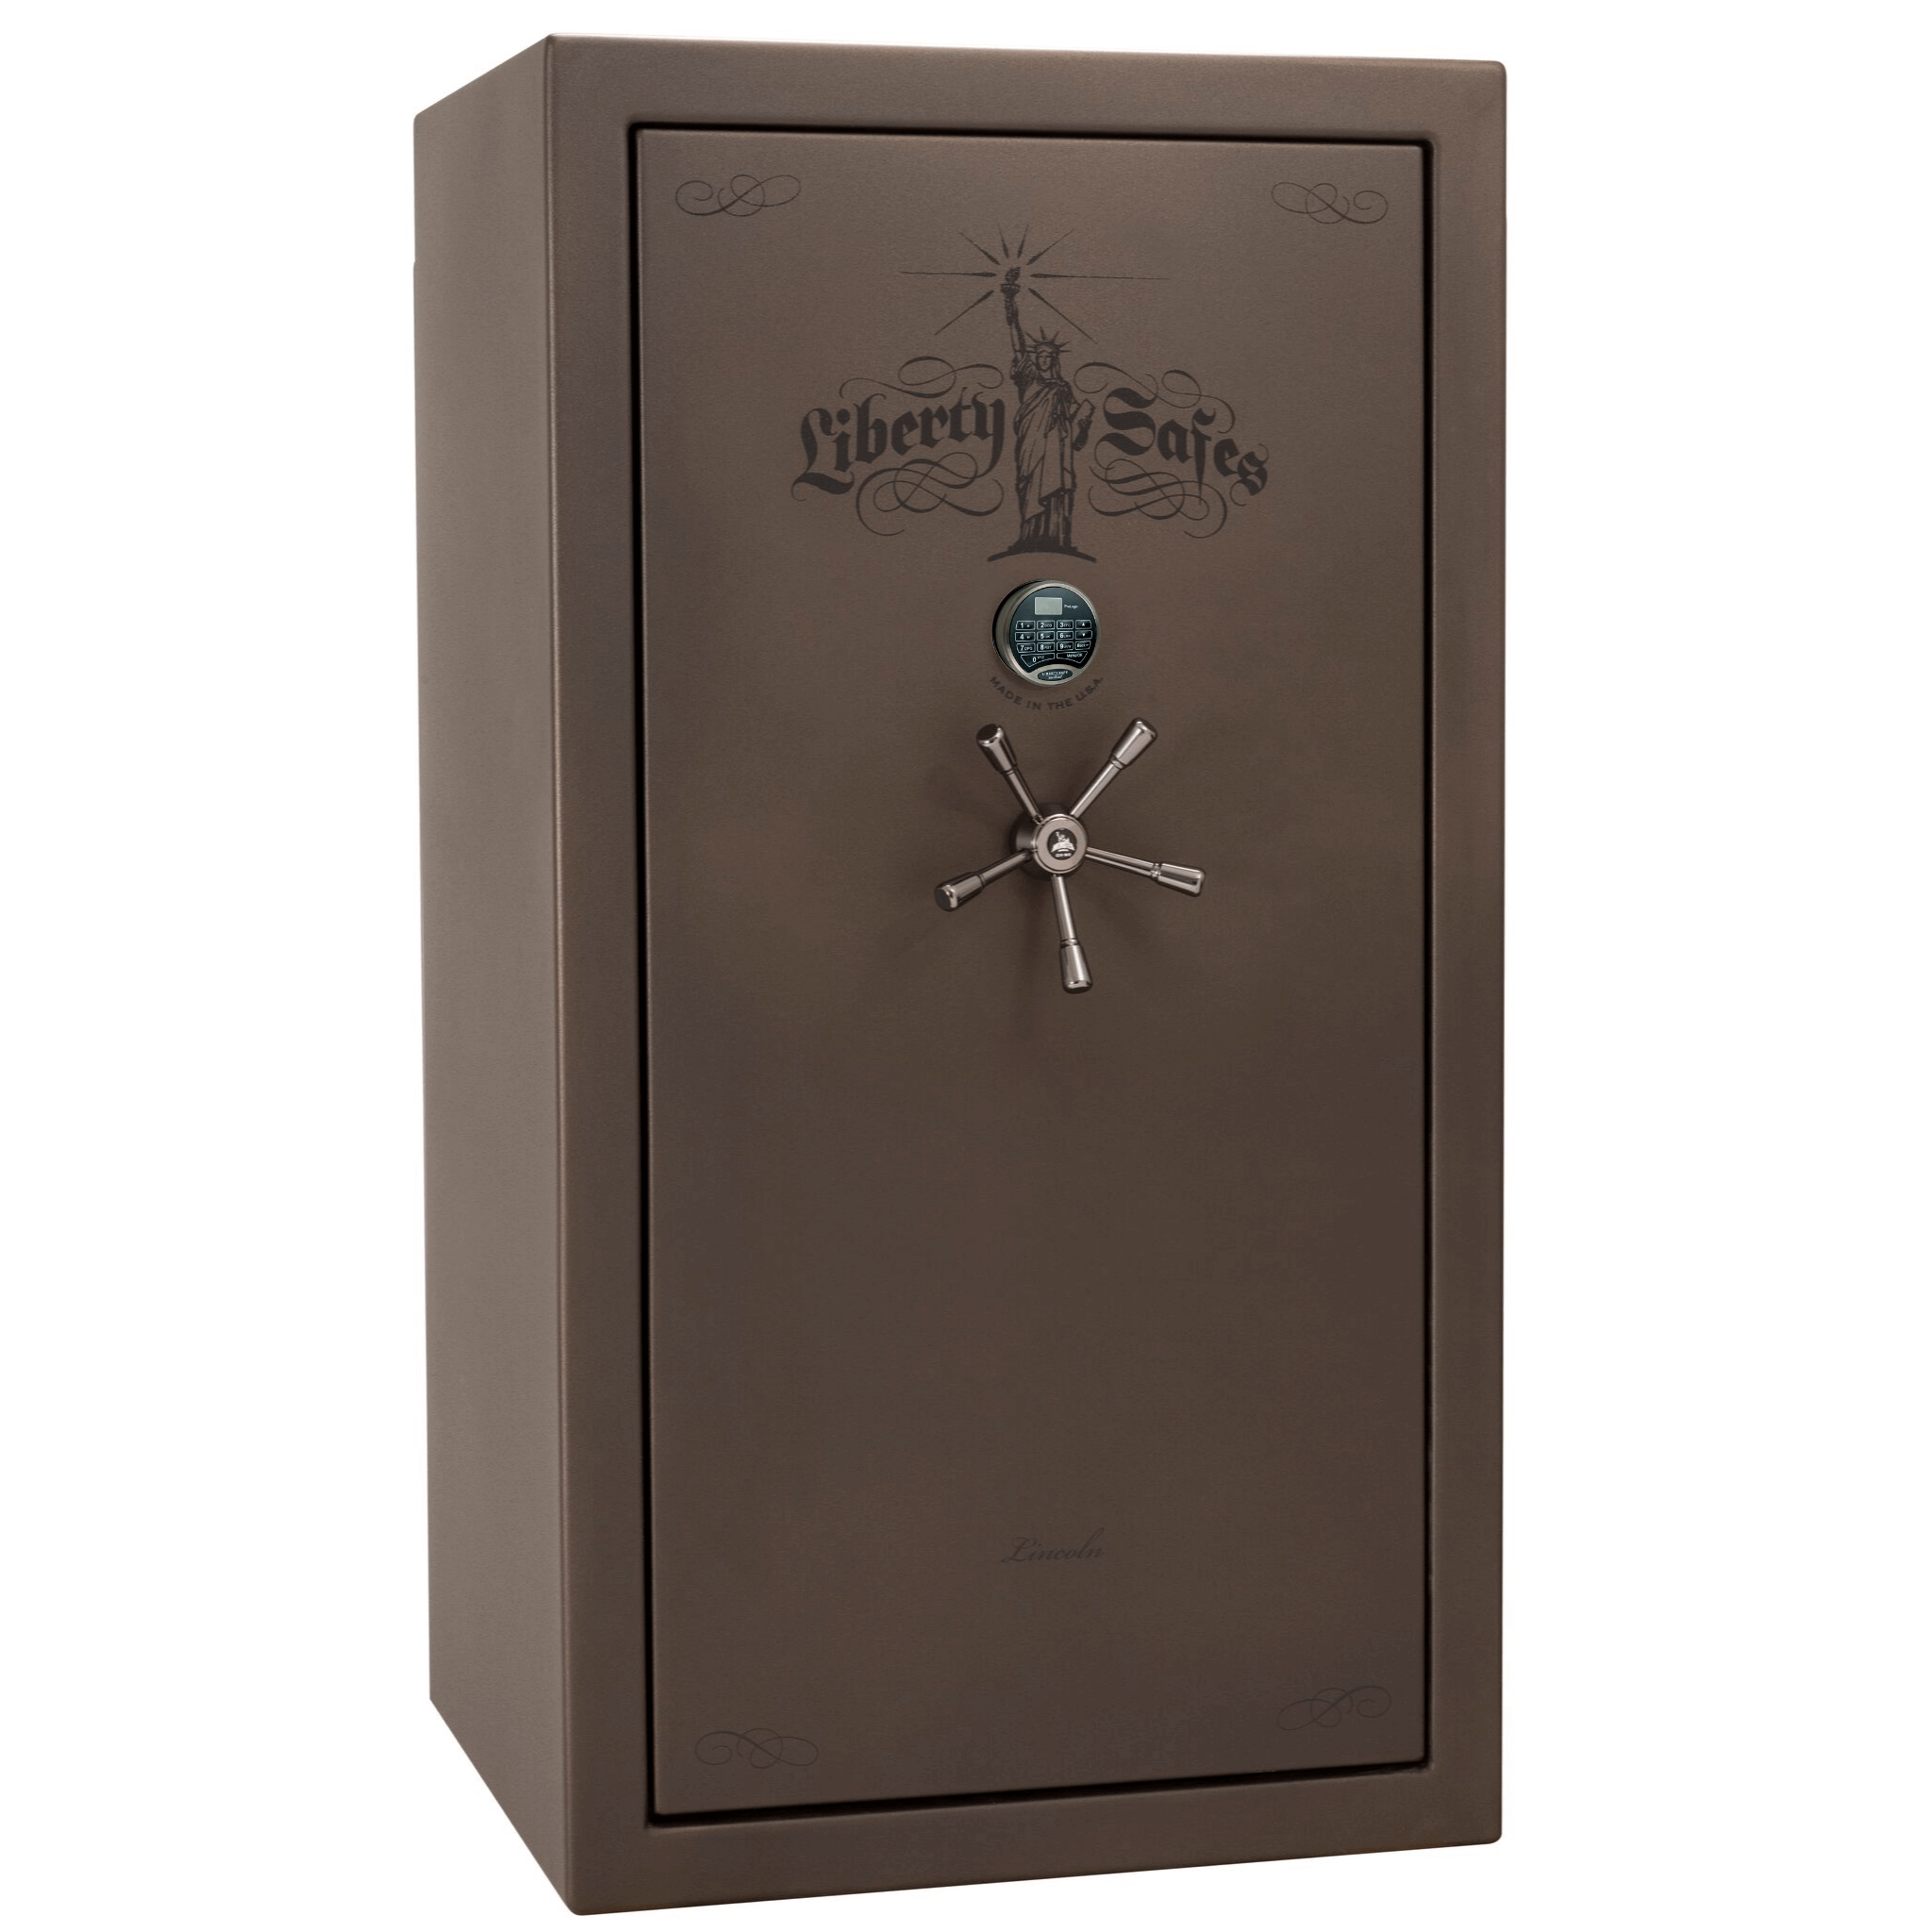 Lincoln Series | Level 5 Security | 110 Minute Fire Protection | 50 | Dimensions: 72.5"(H) x 42"(W) x 32"(D) | Gray Marble | Mechanical Lock